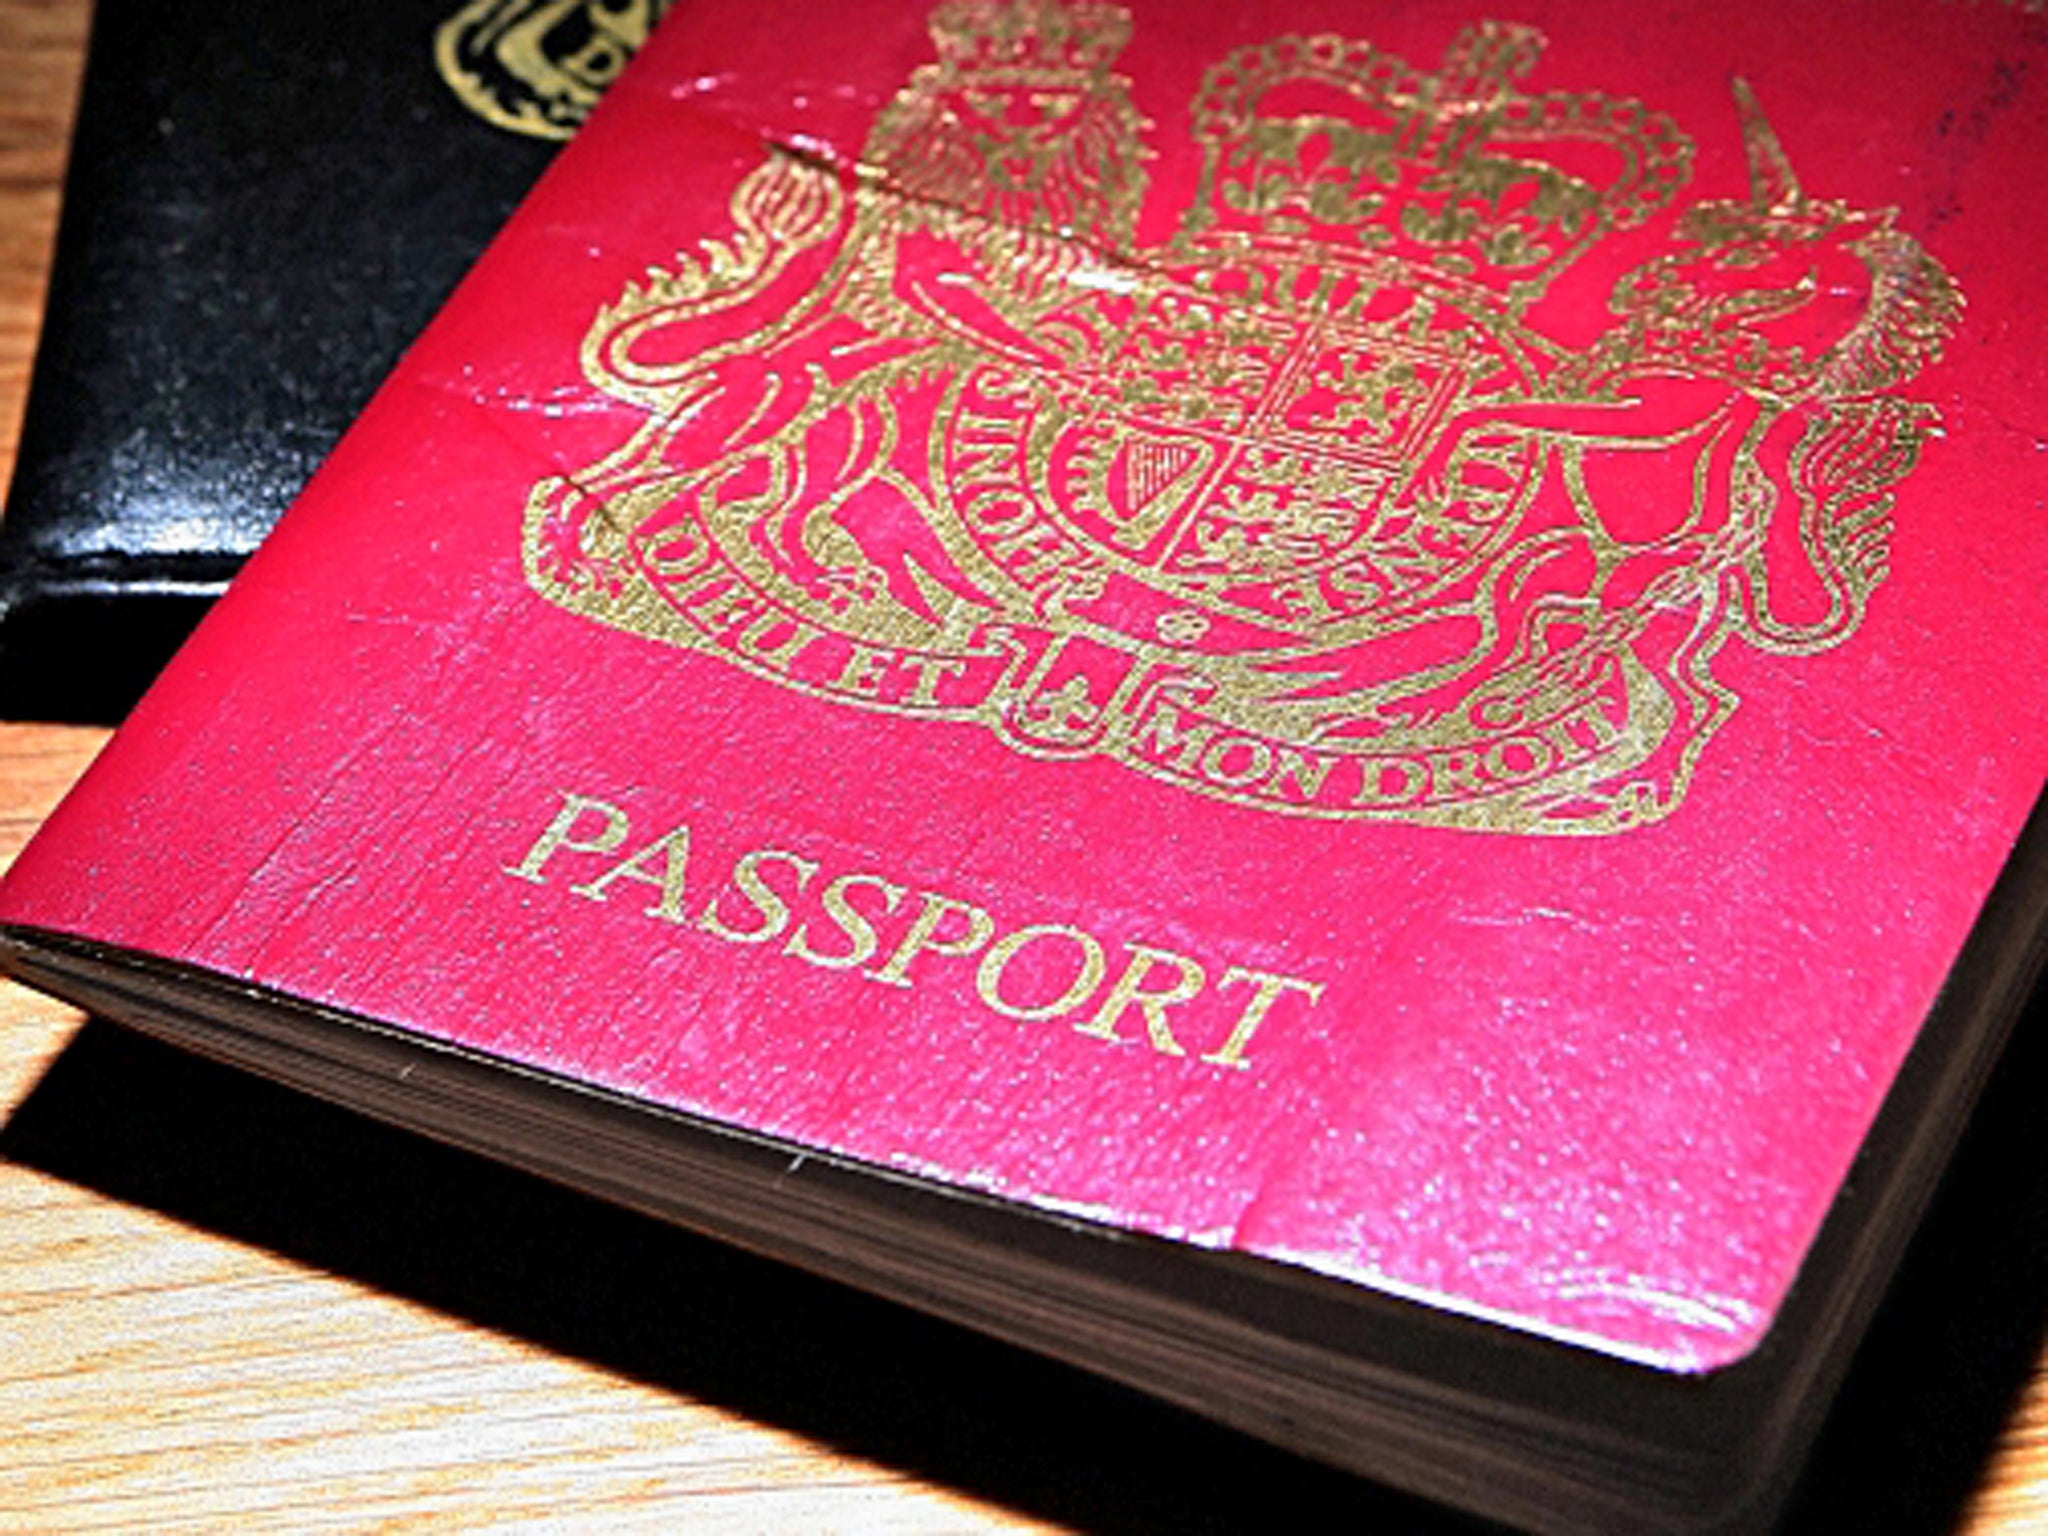 Access all areas? Check when your passport expires